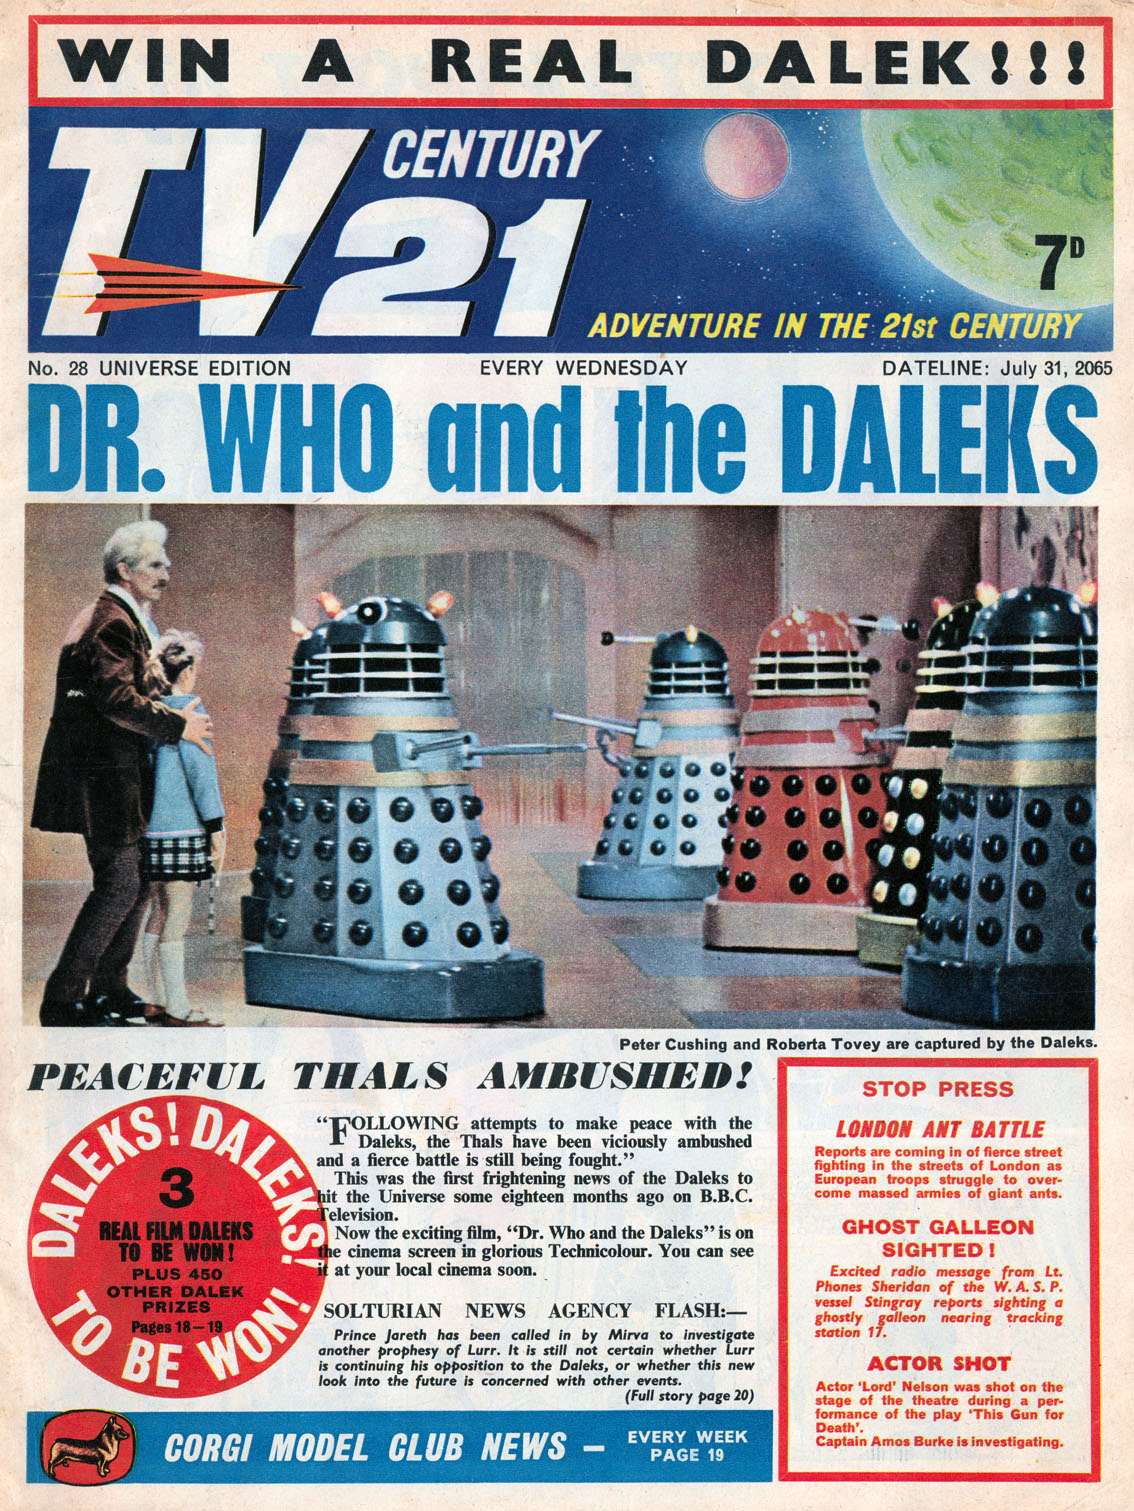 BLIMEY! The Blog of British Comics: Doctor Who in TV211134 x 1511